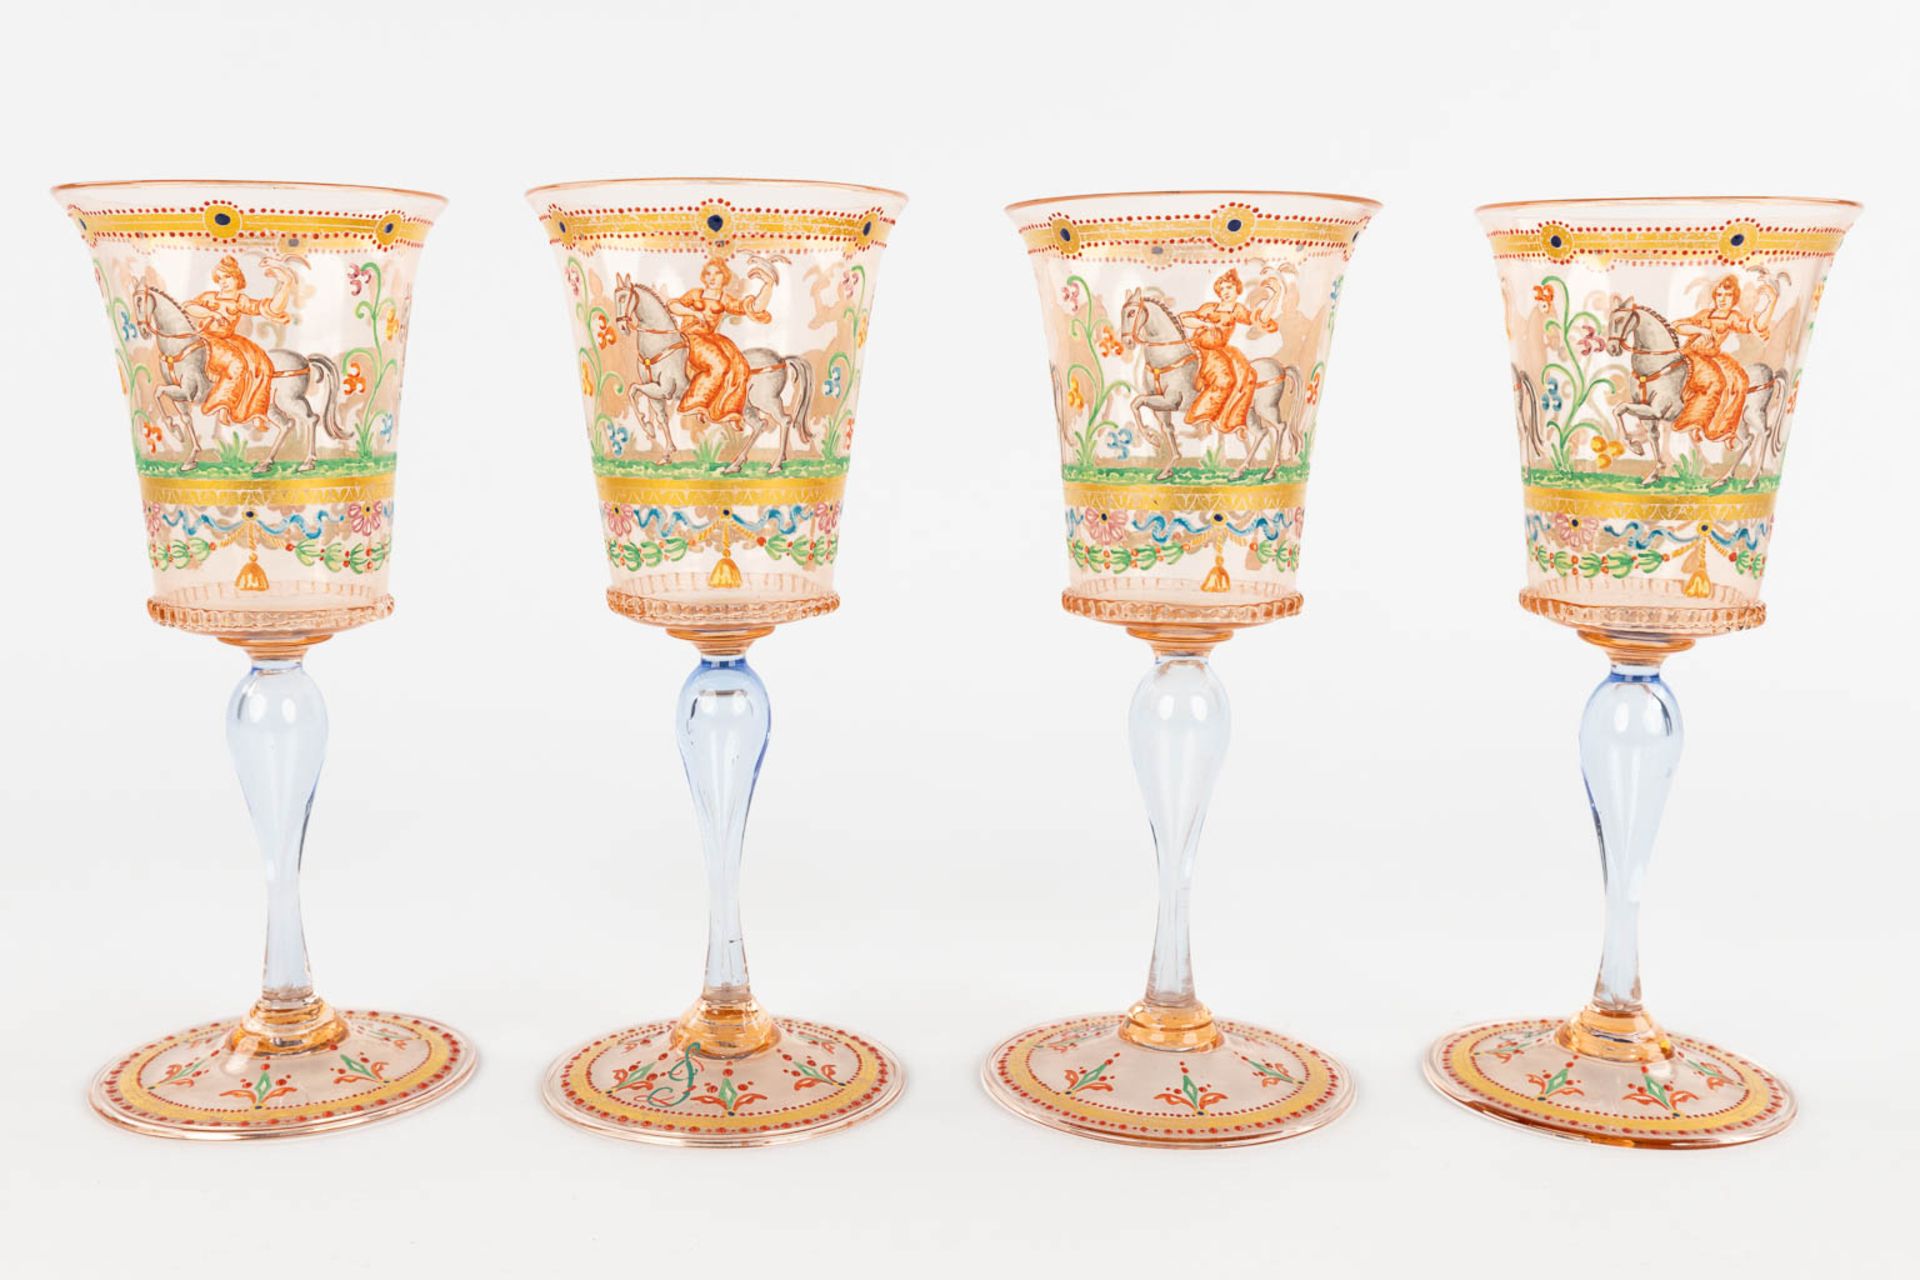 A set of 4 hand-painted and antique goblets, Murano, Salviati, 19th C. (H:17 x D:7 cm) - Image 4 of 16